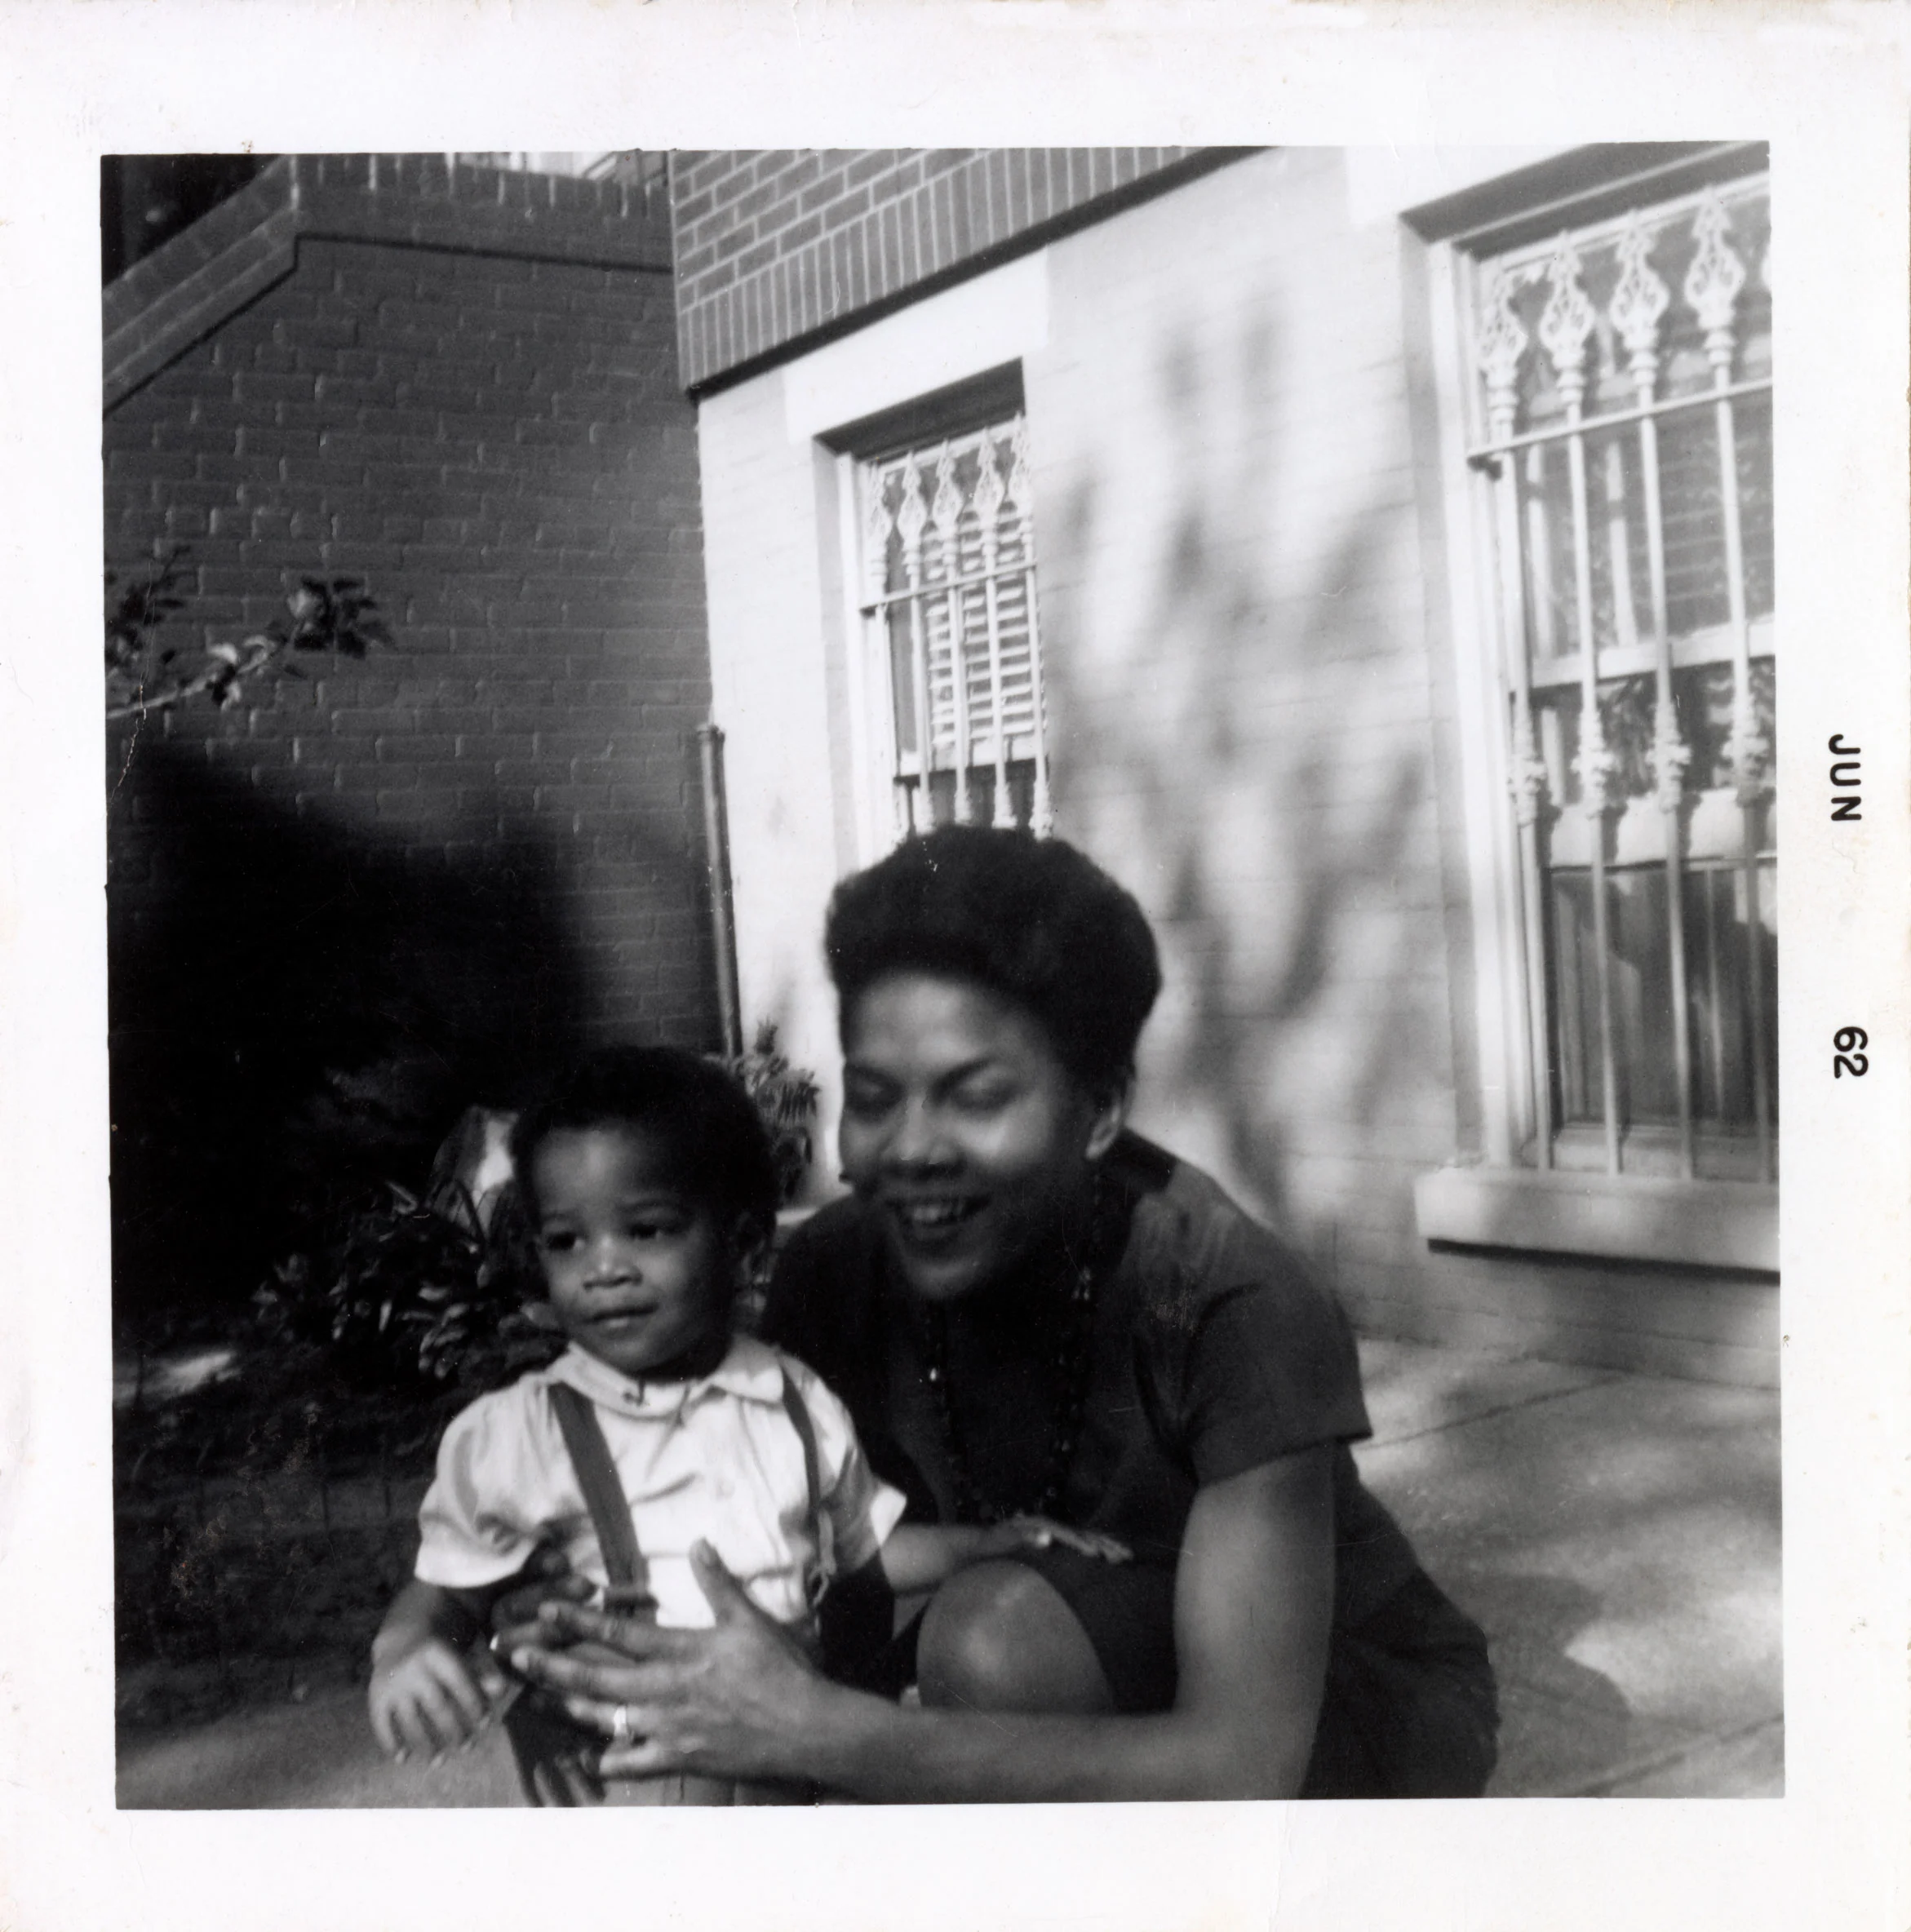 Ph. Jean-Michel and his mother, Matilde. © The Estate of Jean-Michel Basquiat